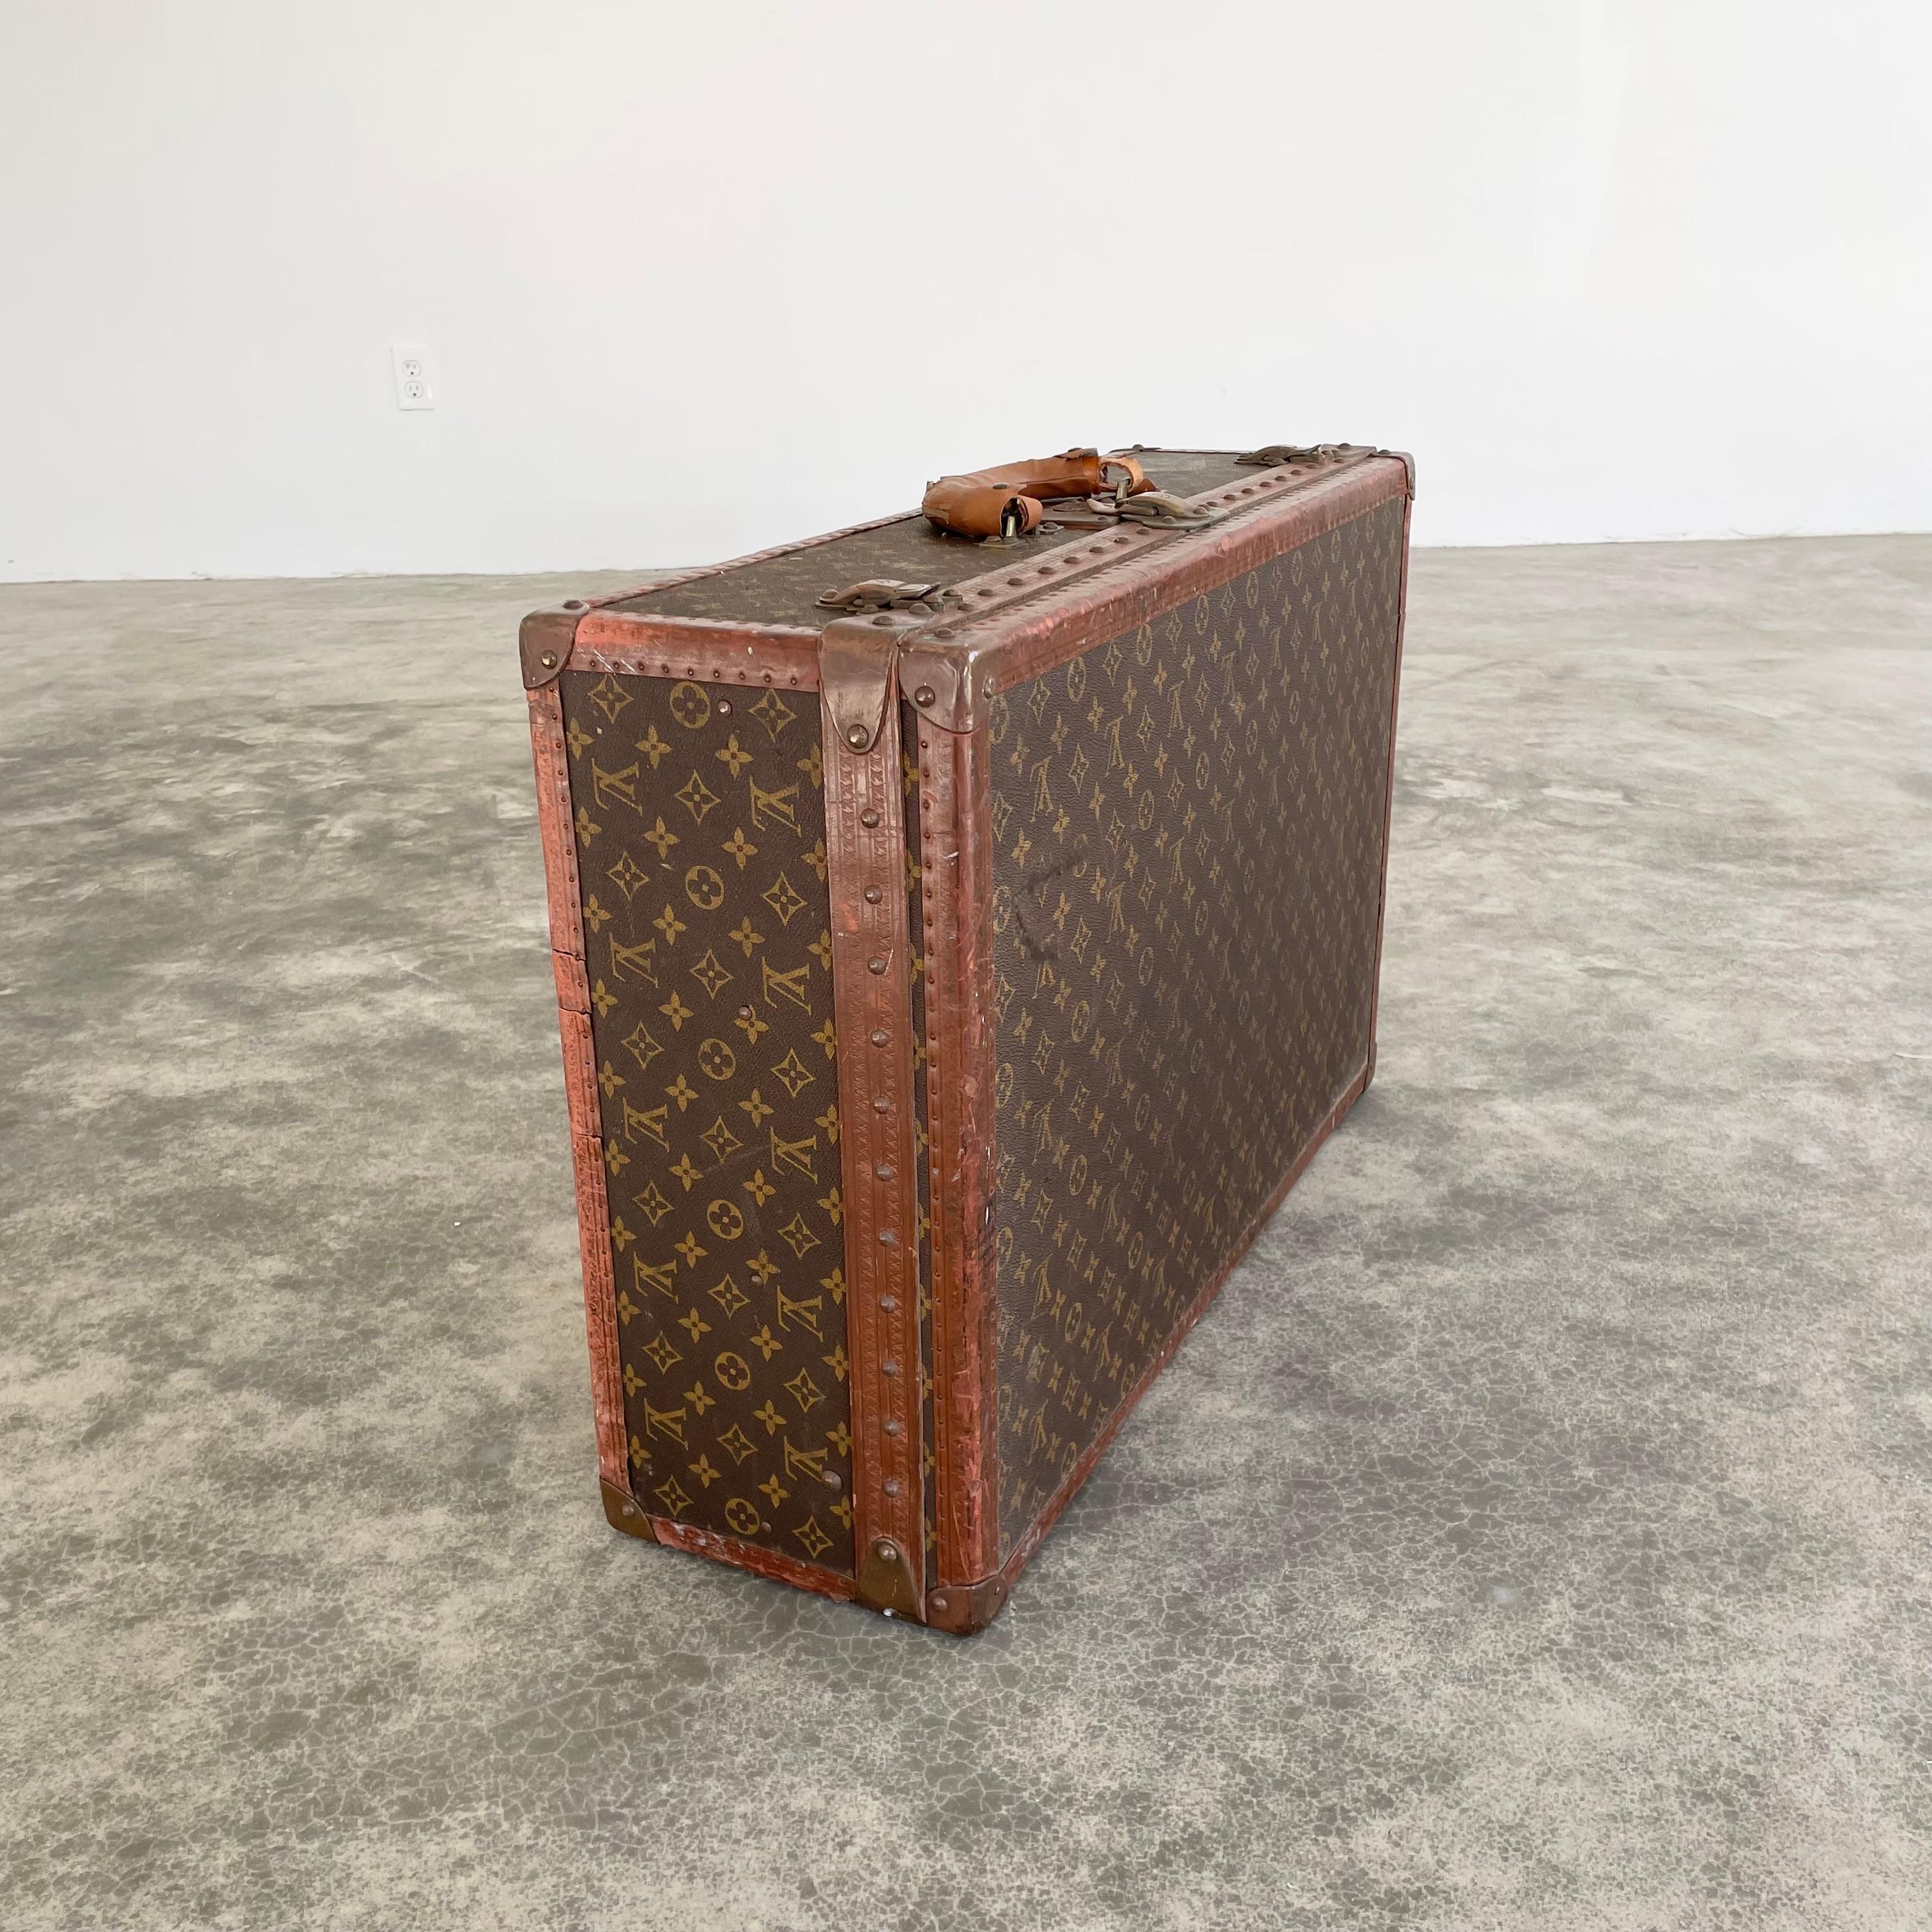 Classic vintage Louis Vuitton trunk suitcase from 1948. Perfect for travel and weekend trips. This LV monogram print trunk is made with saddle leather and brass hardware and wrapped in the iconic Louis Vuitton canvas. Louis Vuitton was the first